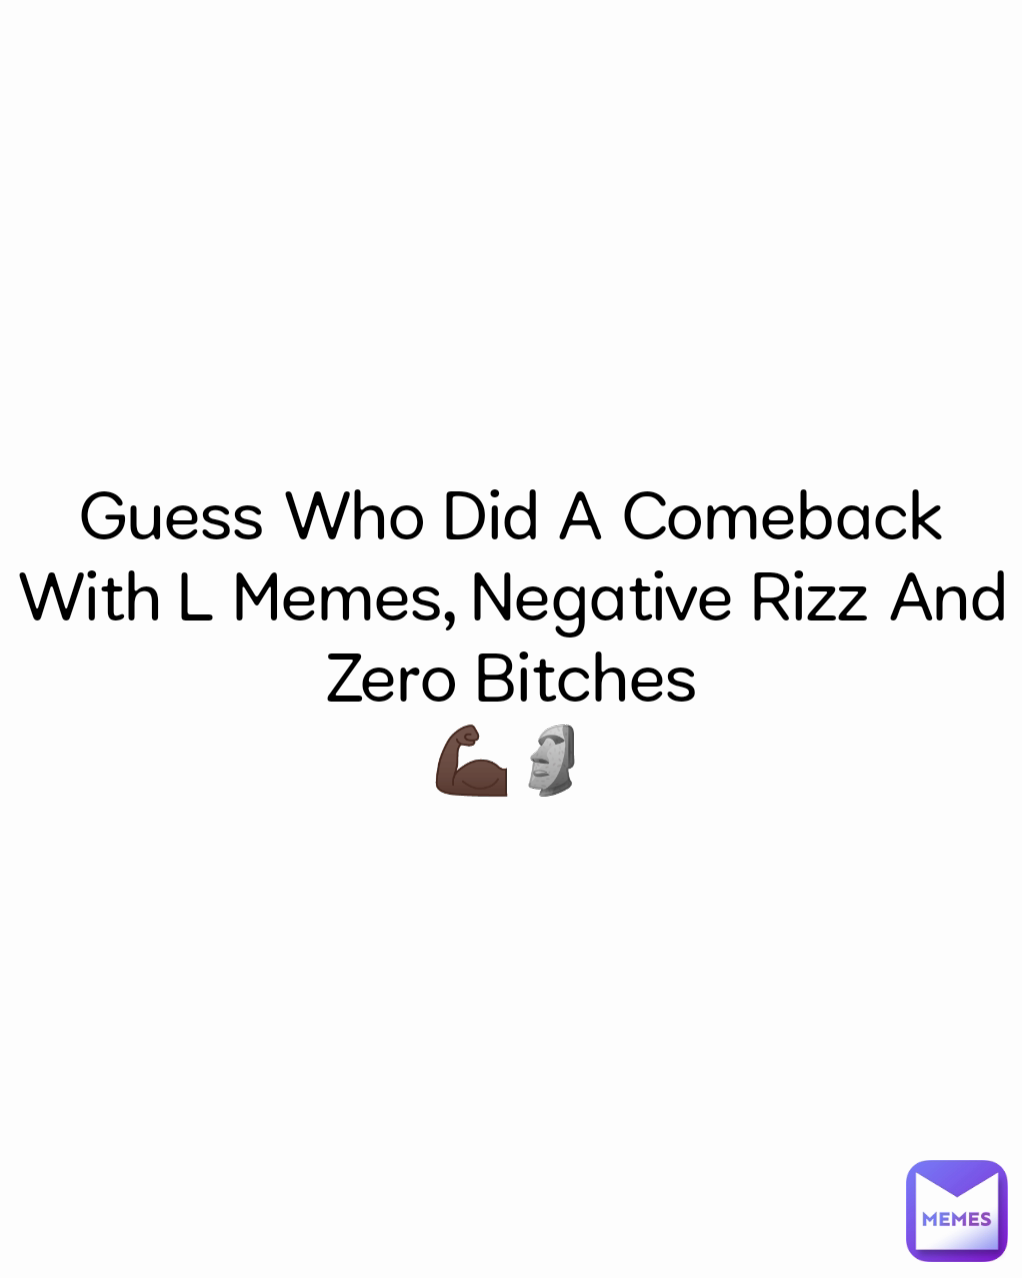 Guess Who Did A Comeback With L Memes,Negative Rizz And Zero Bitches
💪🏿🗿